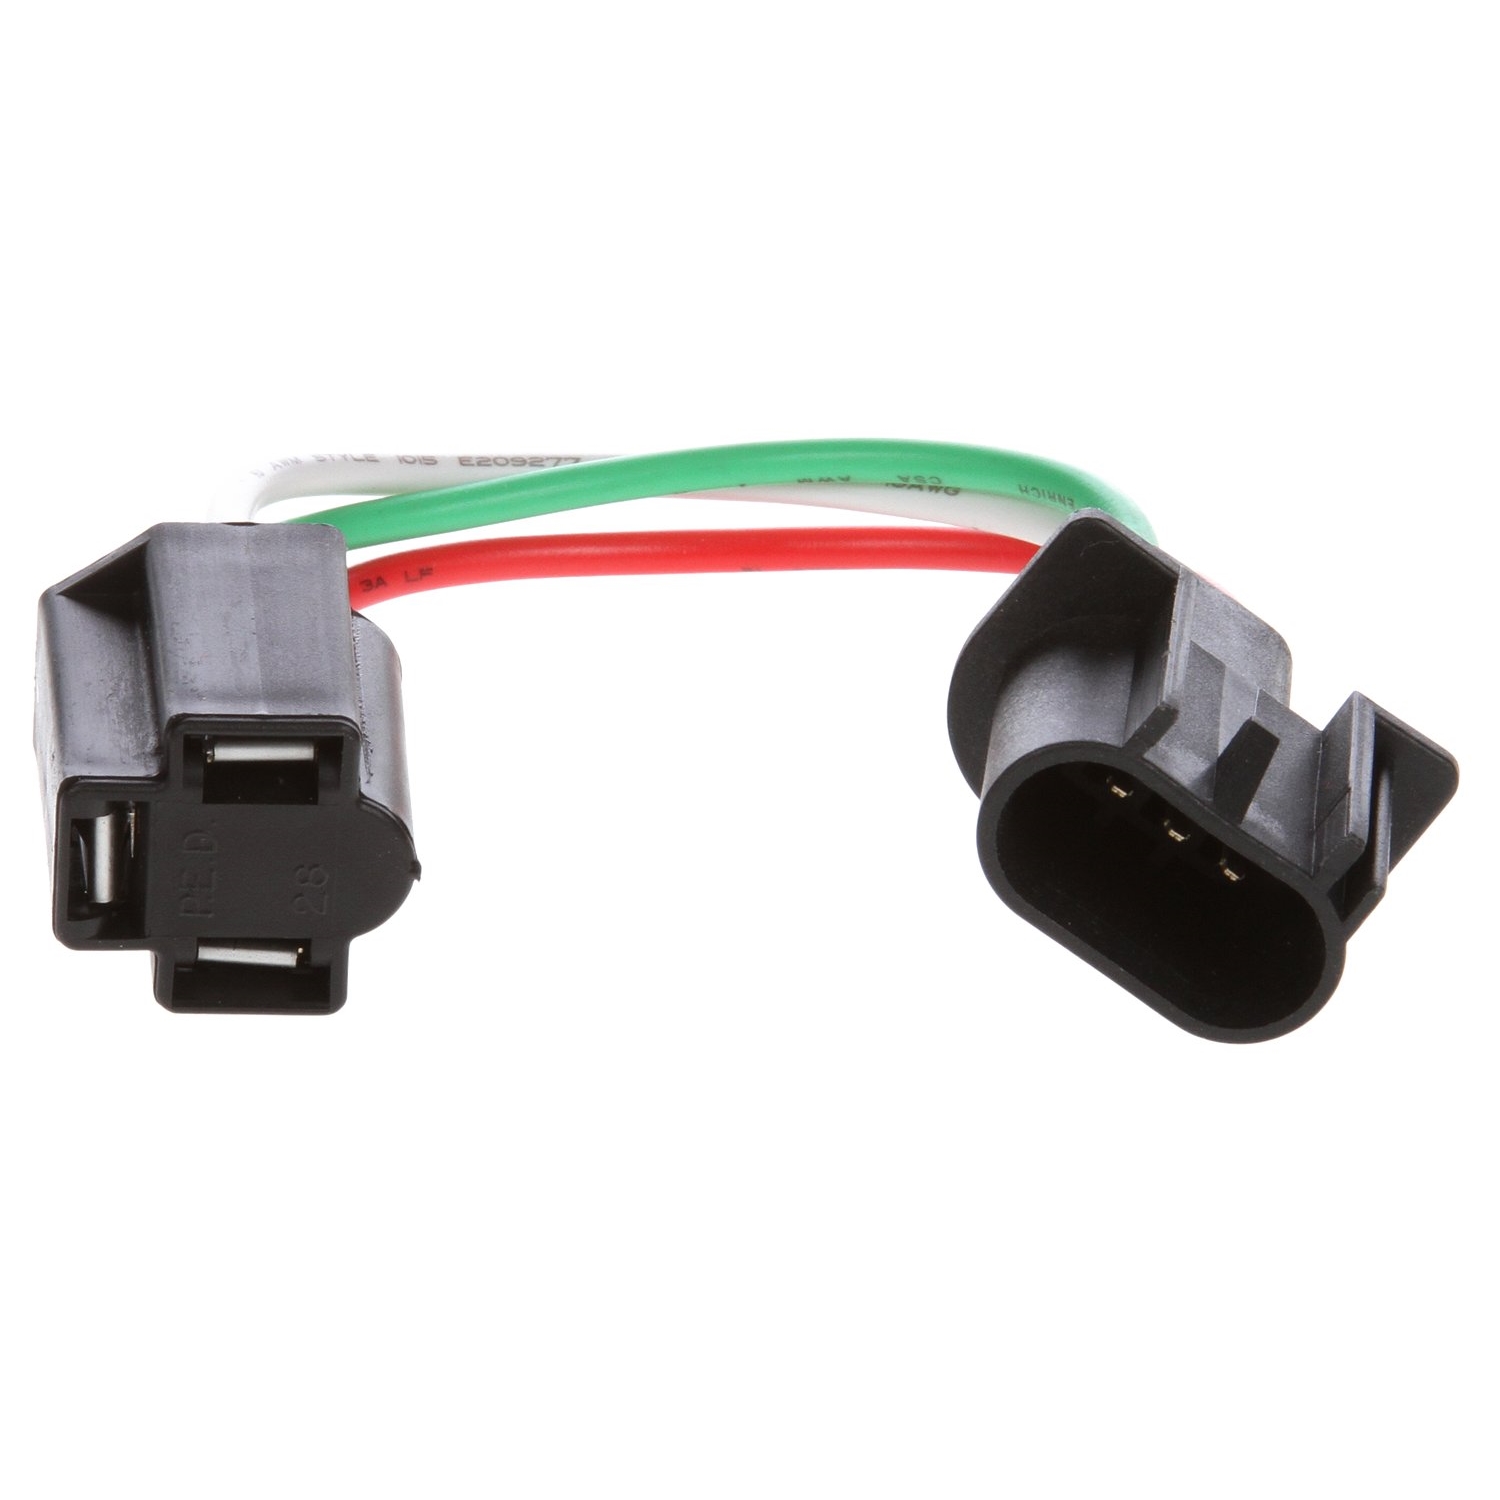 Premium Universal Connector Pigtail For 1983-2015 Fits Most Popular Vehicles